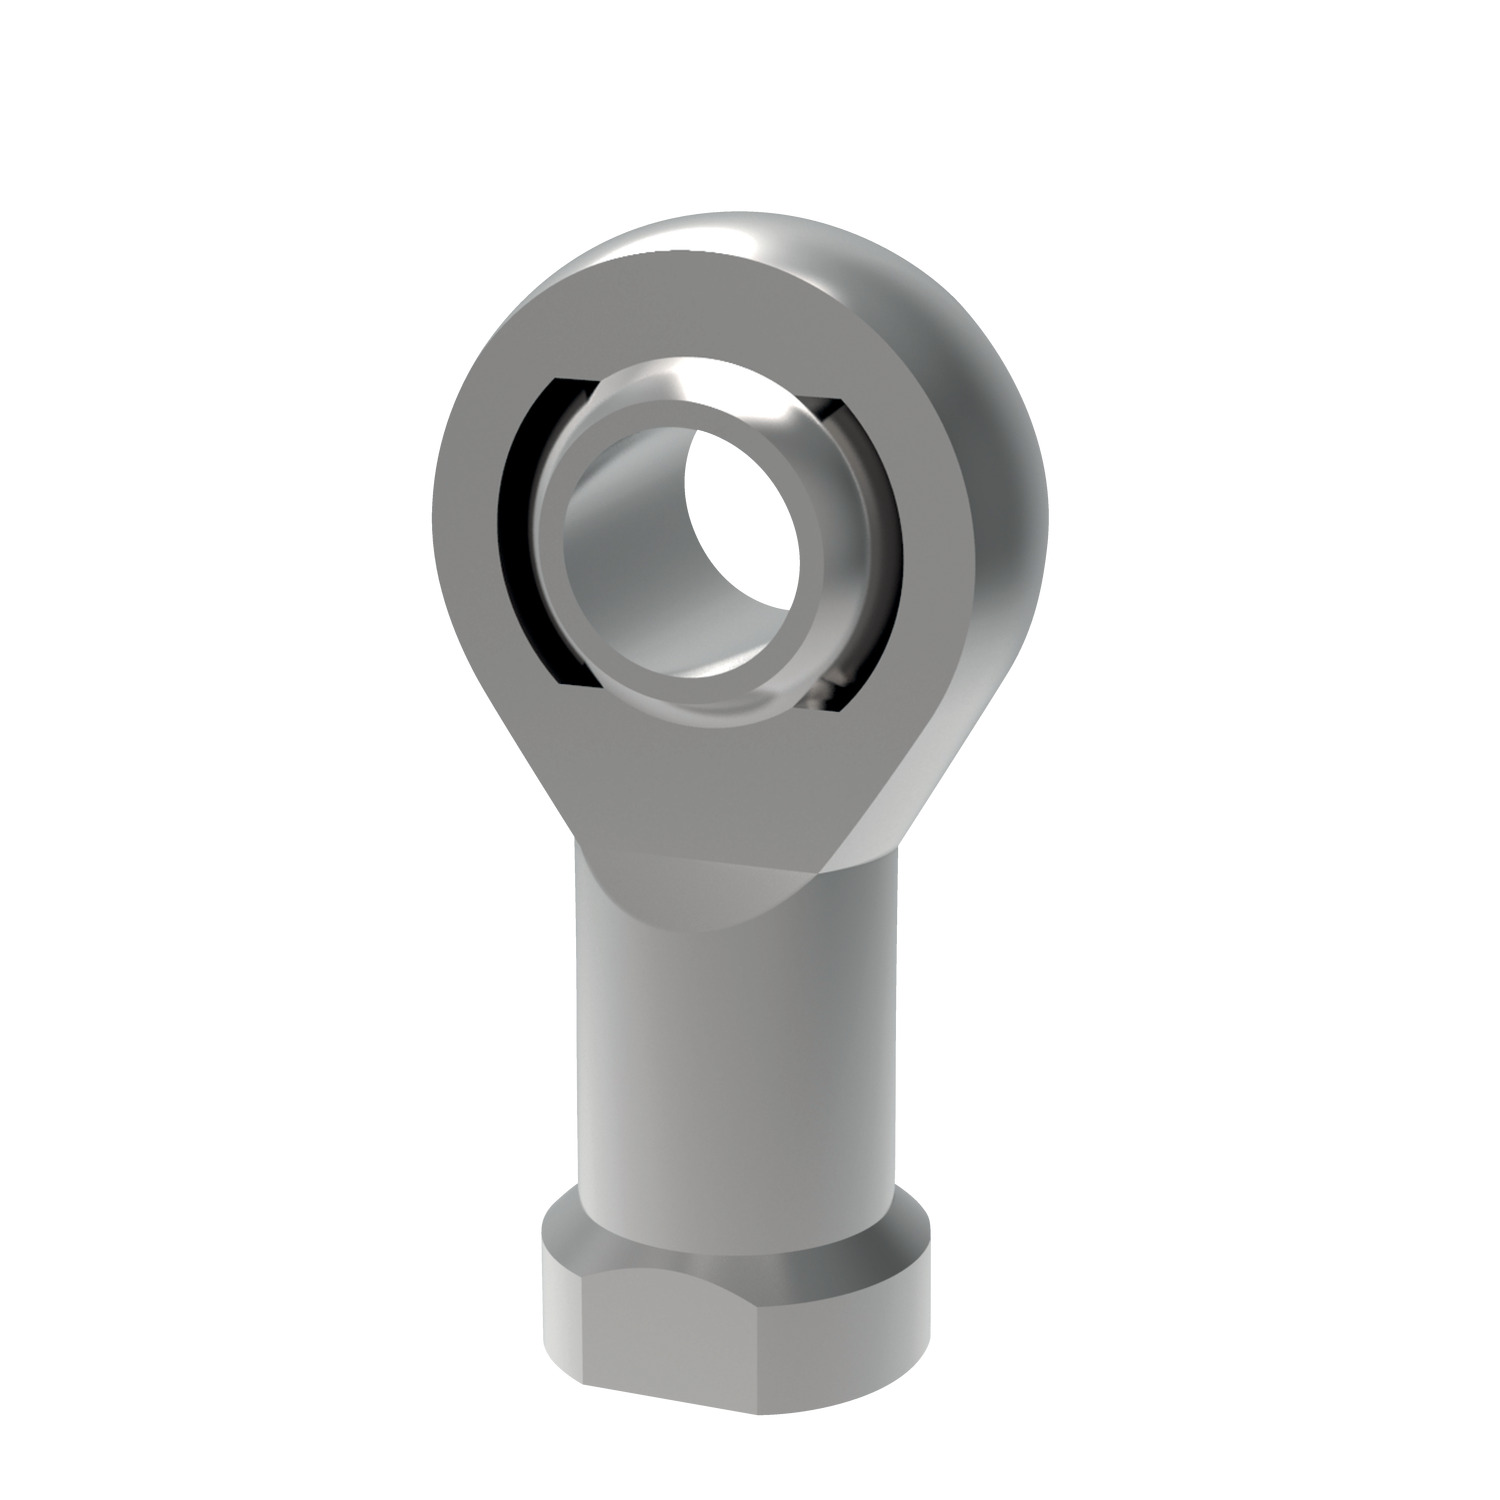 Heavy-Duty Rod Ends - Female Heavy duty rod ends with integral spherical plain bearing - Female. Both right and left hand thread available. To DIN ISO 12240-4.